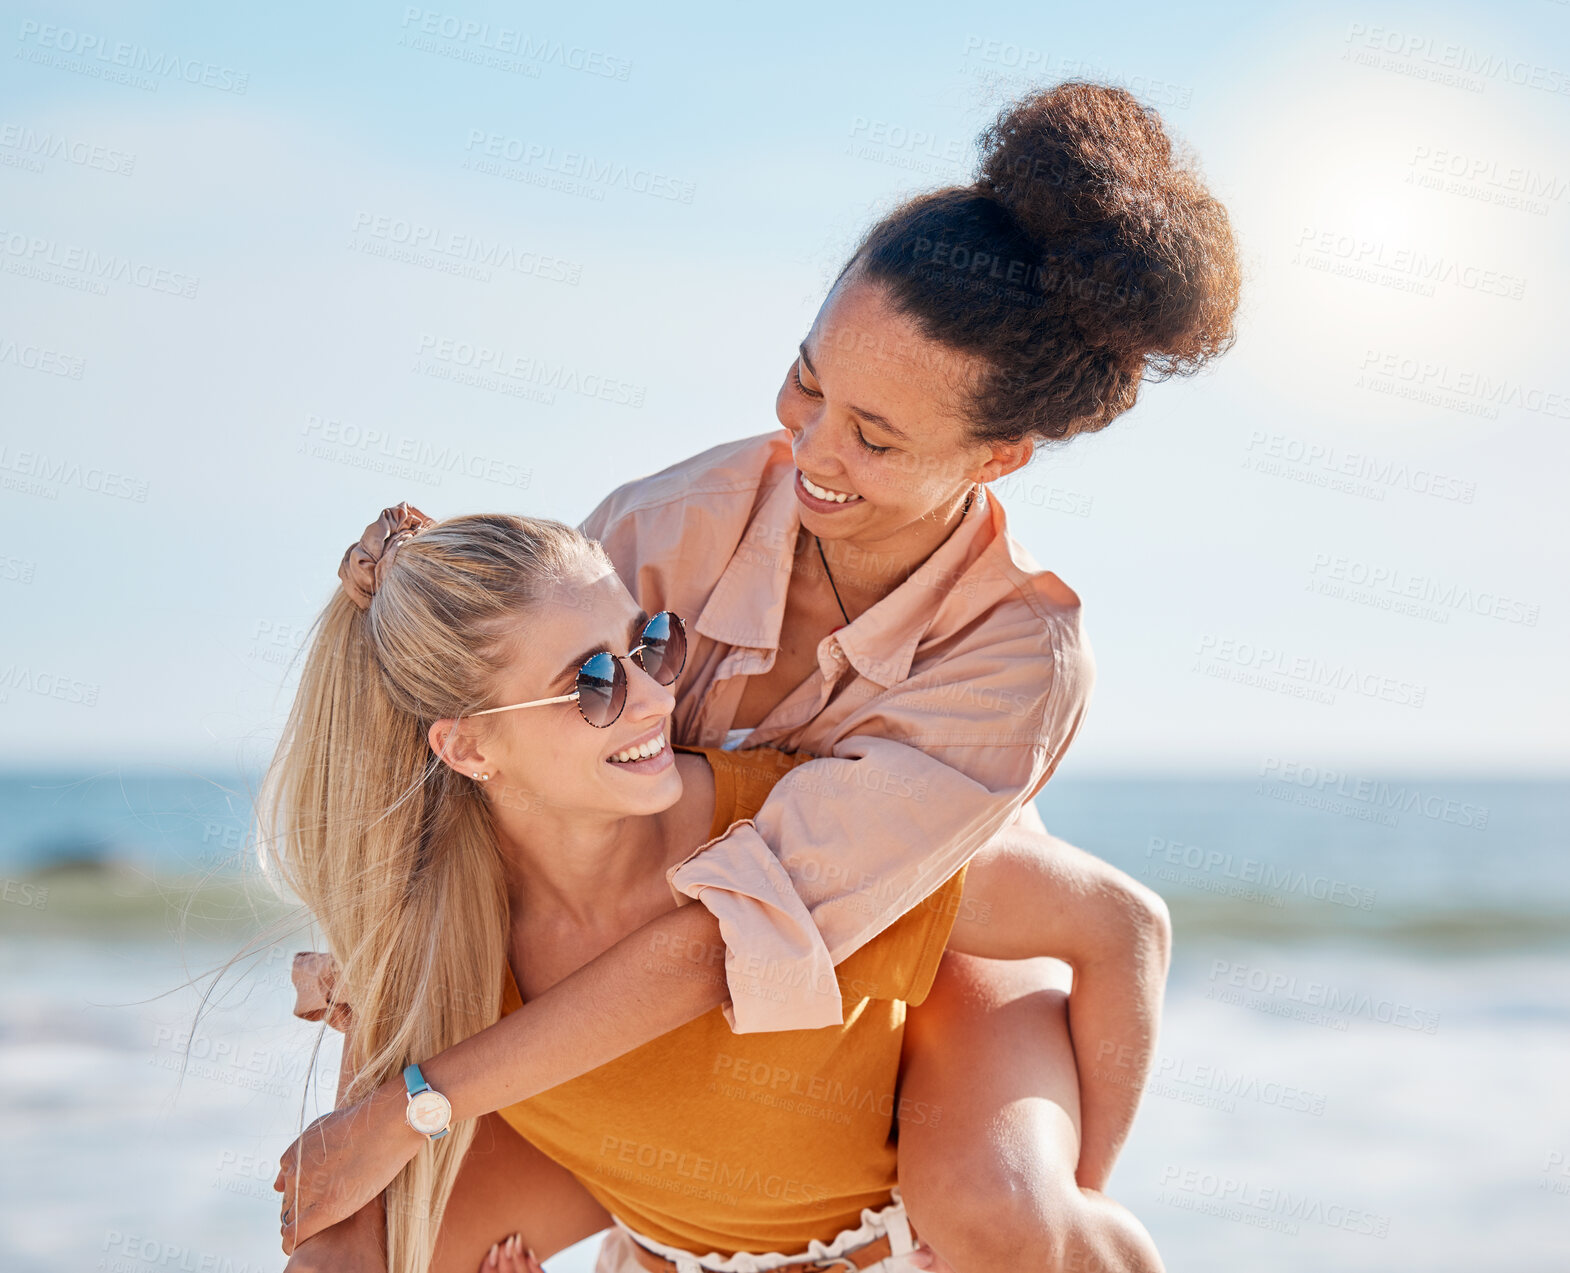 Buy stock photo Piggyback, beach and happy couple of friends with lgbtq, lesbian or love freedom on summer vacation. Blue sky, ocean and diversity women on date, fun support and valentines holiday with hug by sea